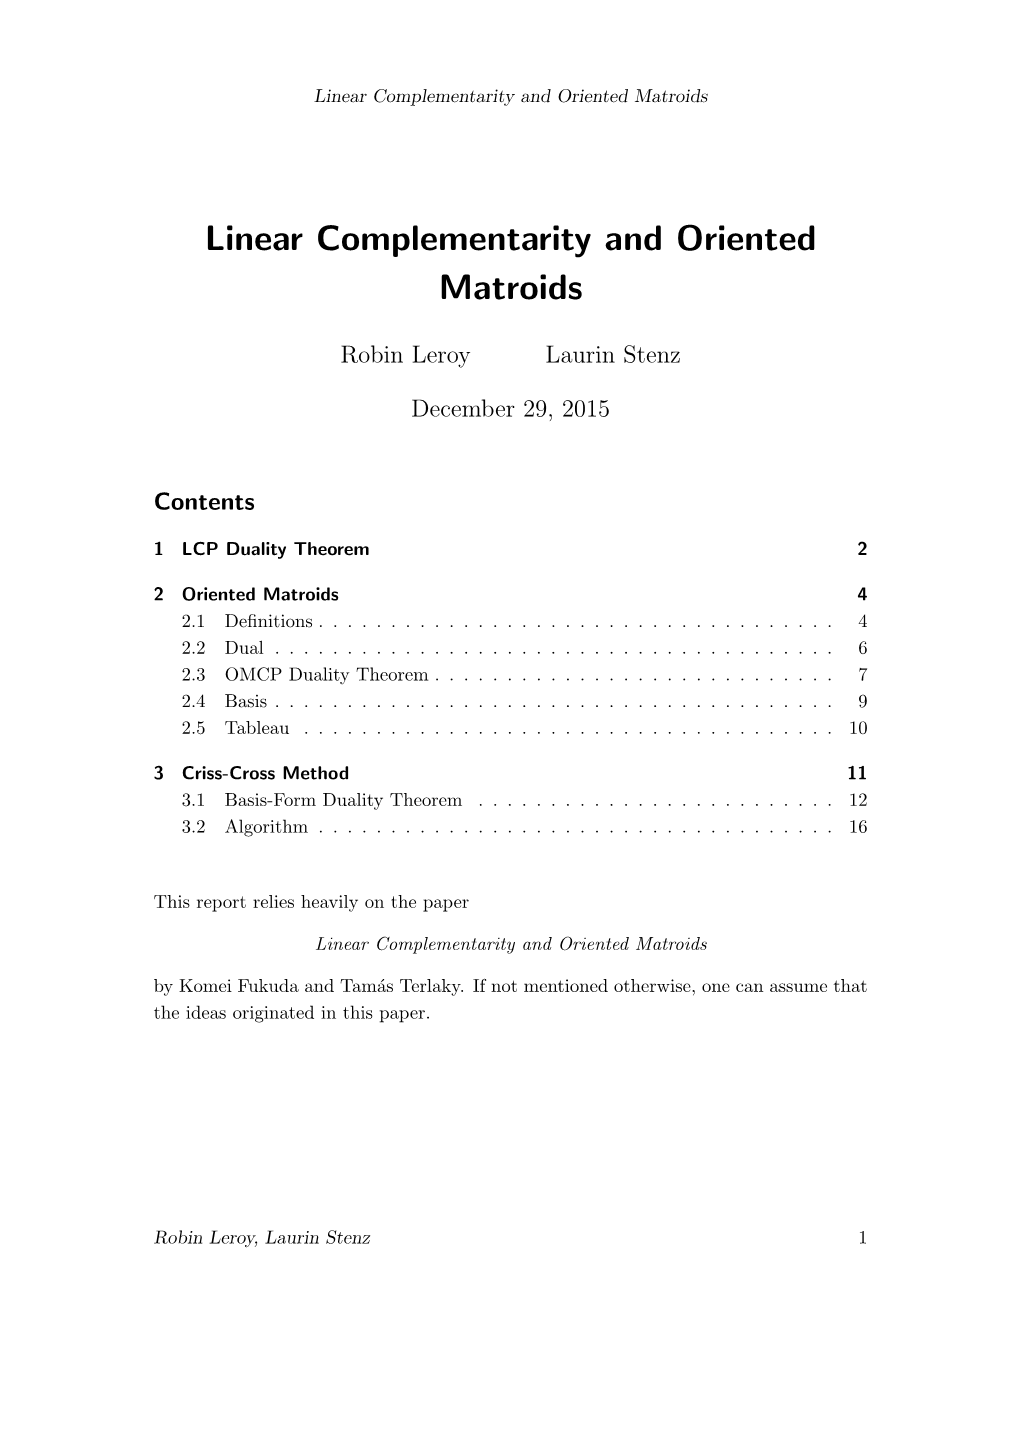 Linear Complementarity and Oriented Matroids